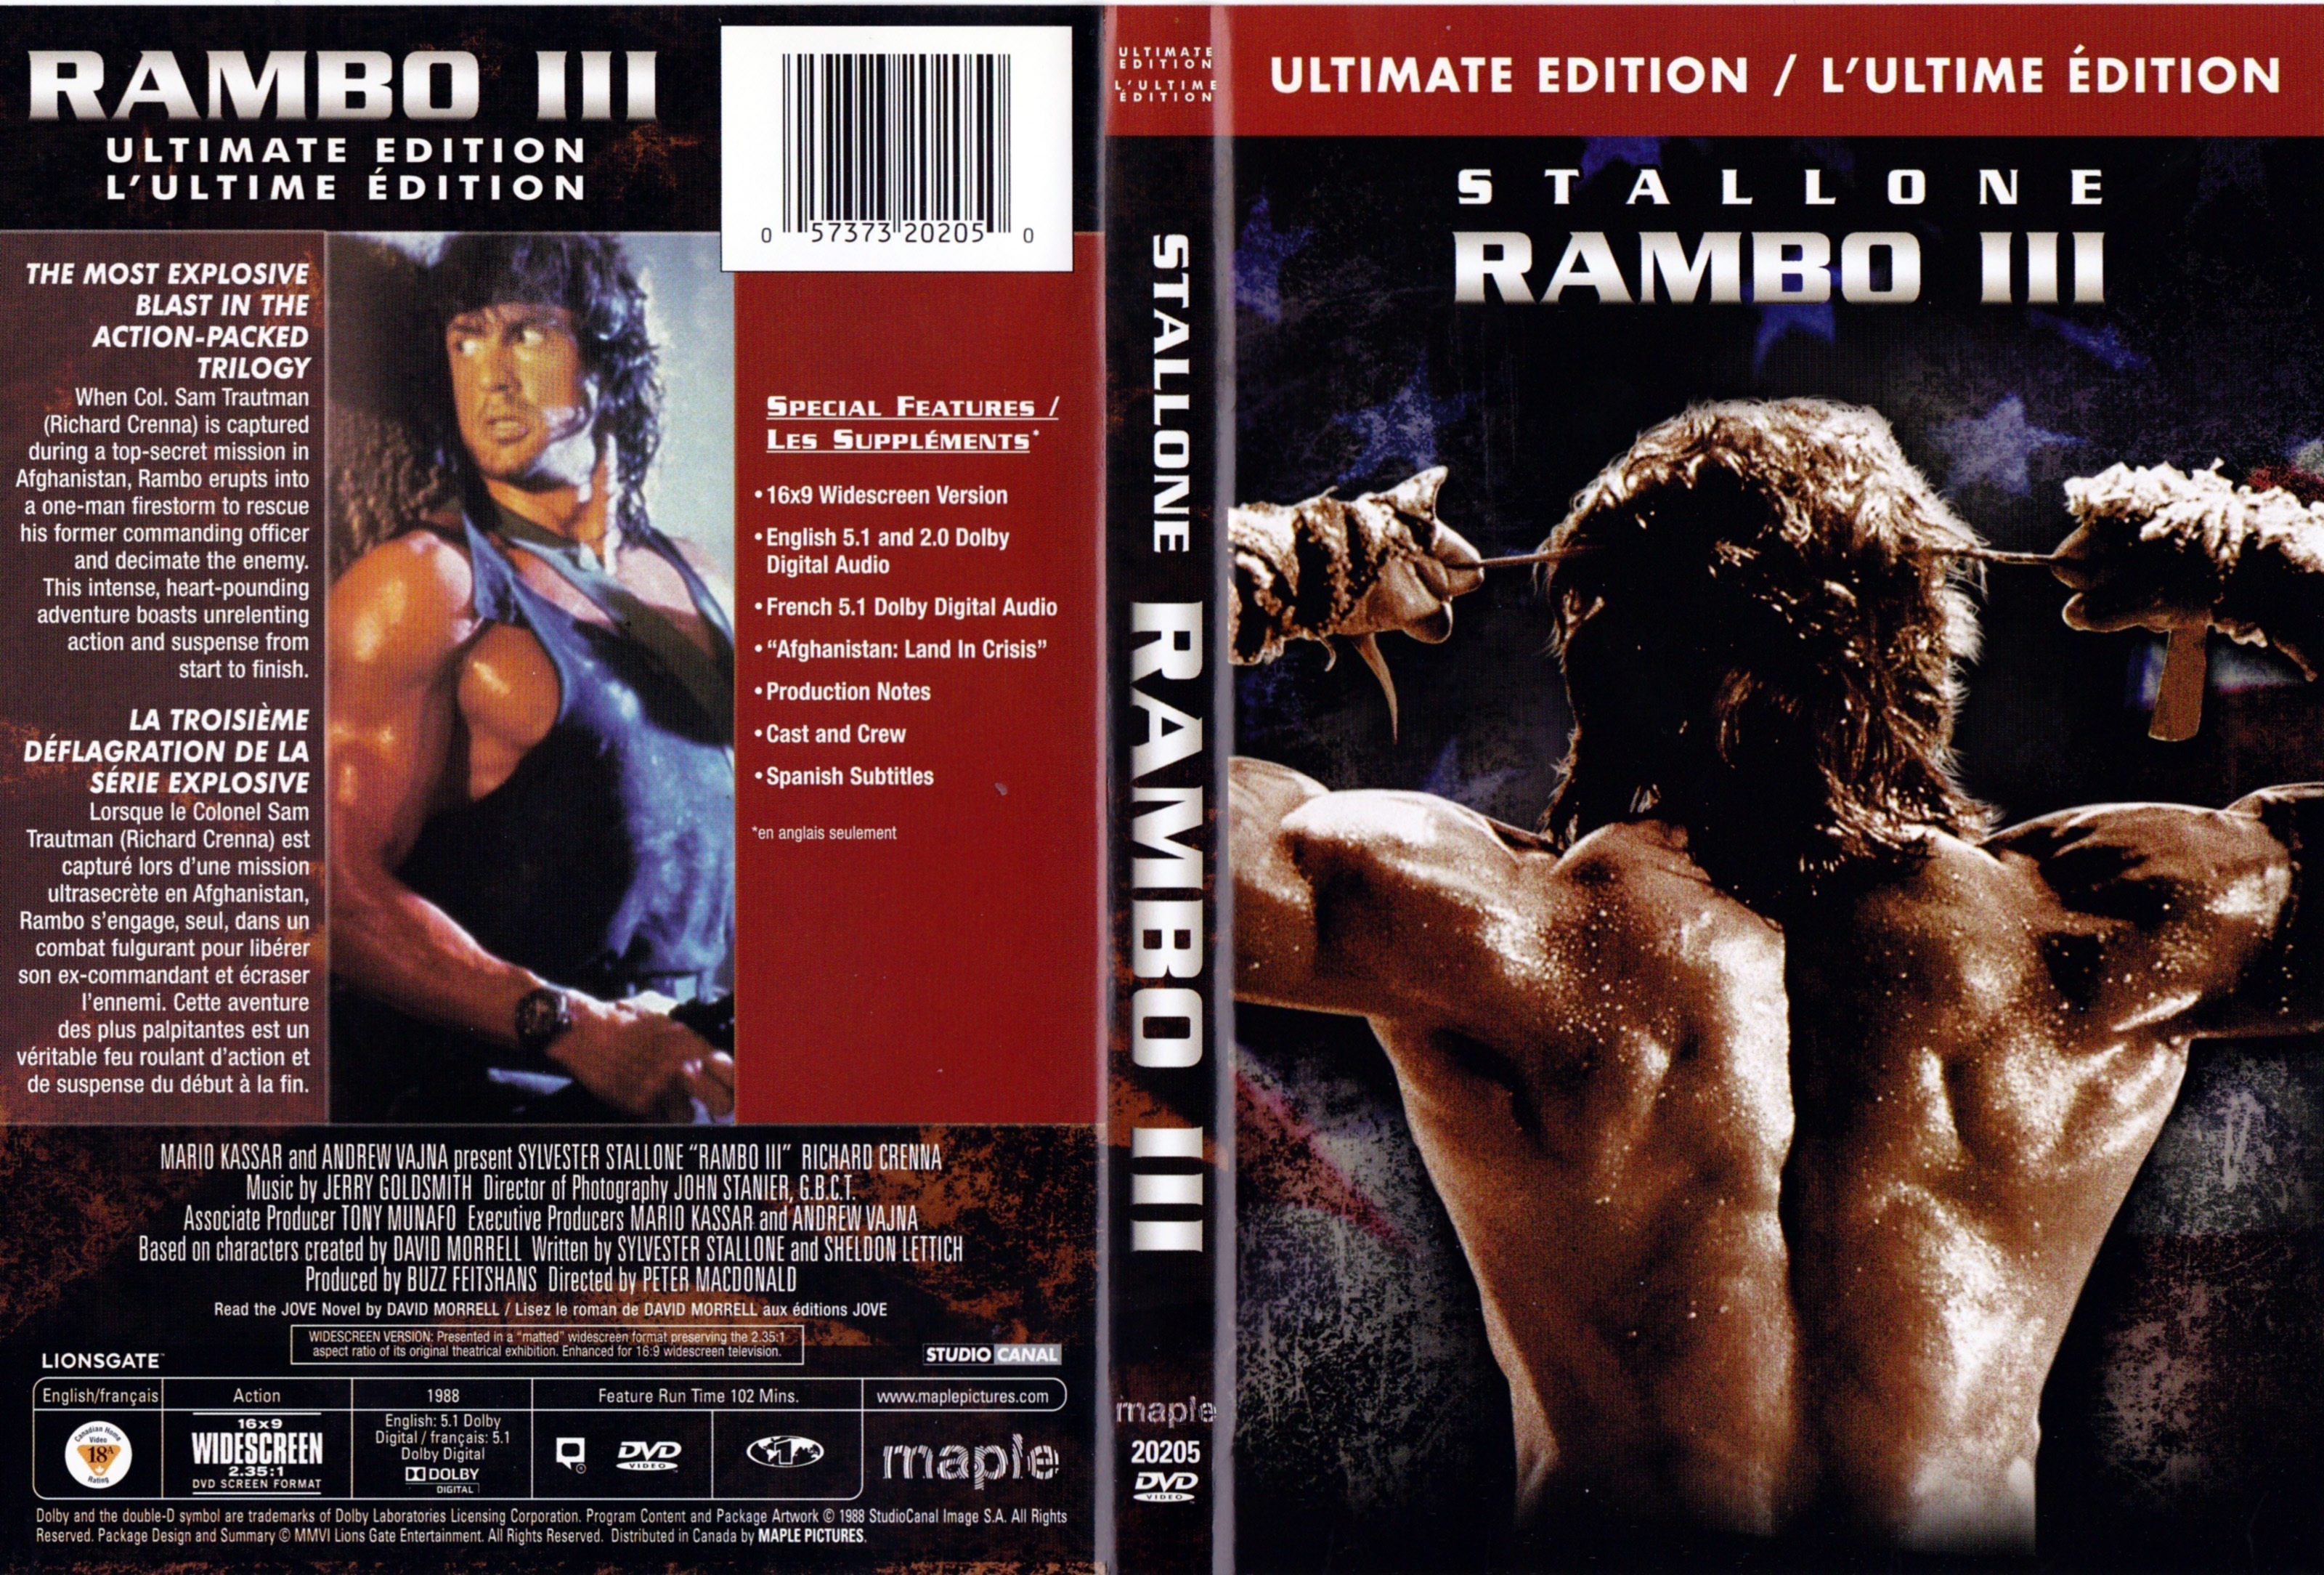 Jaquette DVD Rambo 3 (Canadienne)